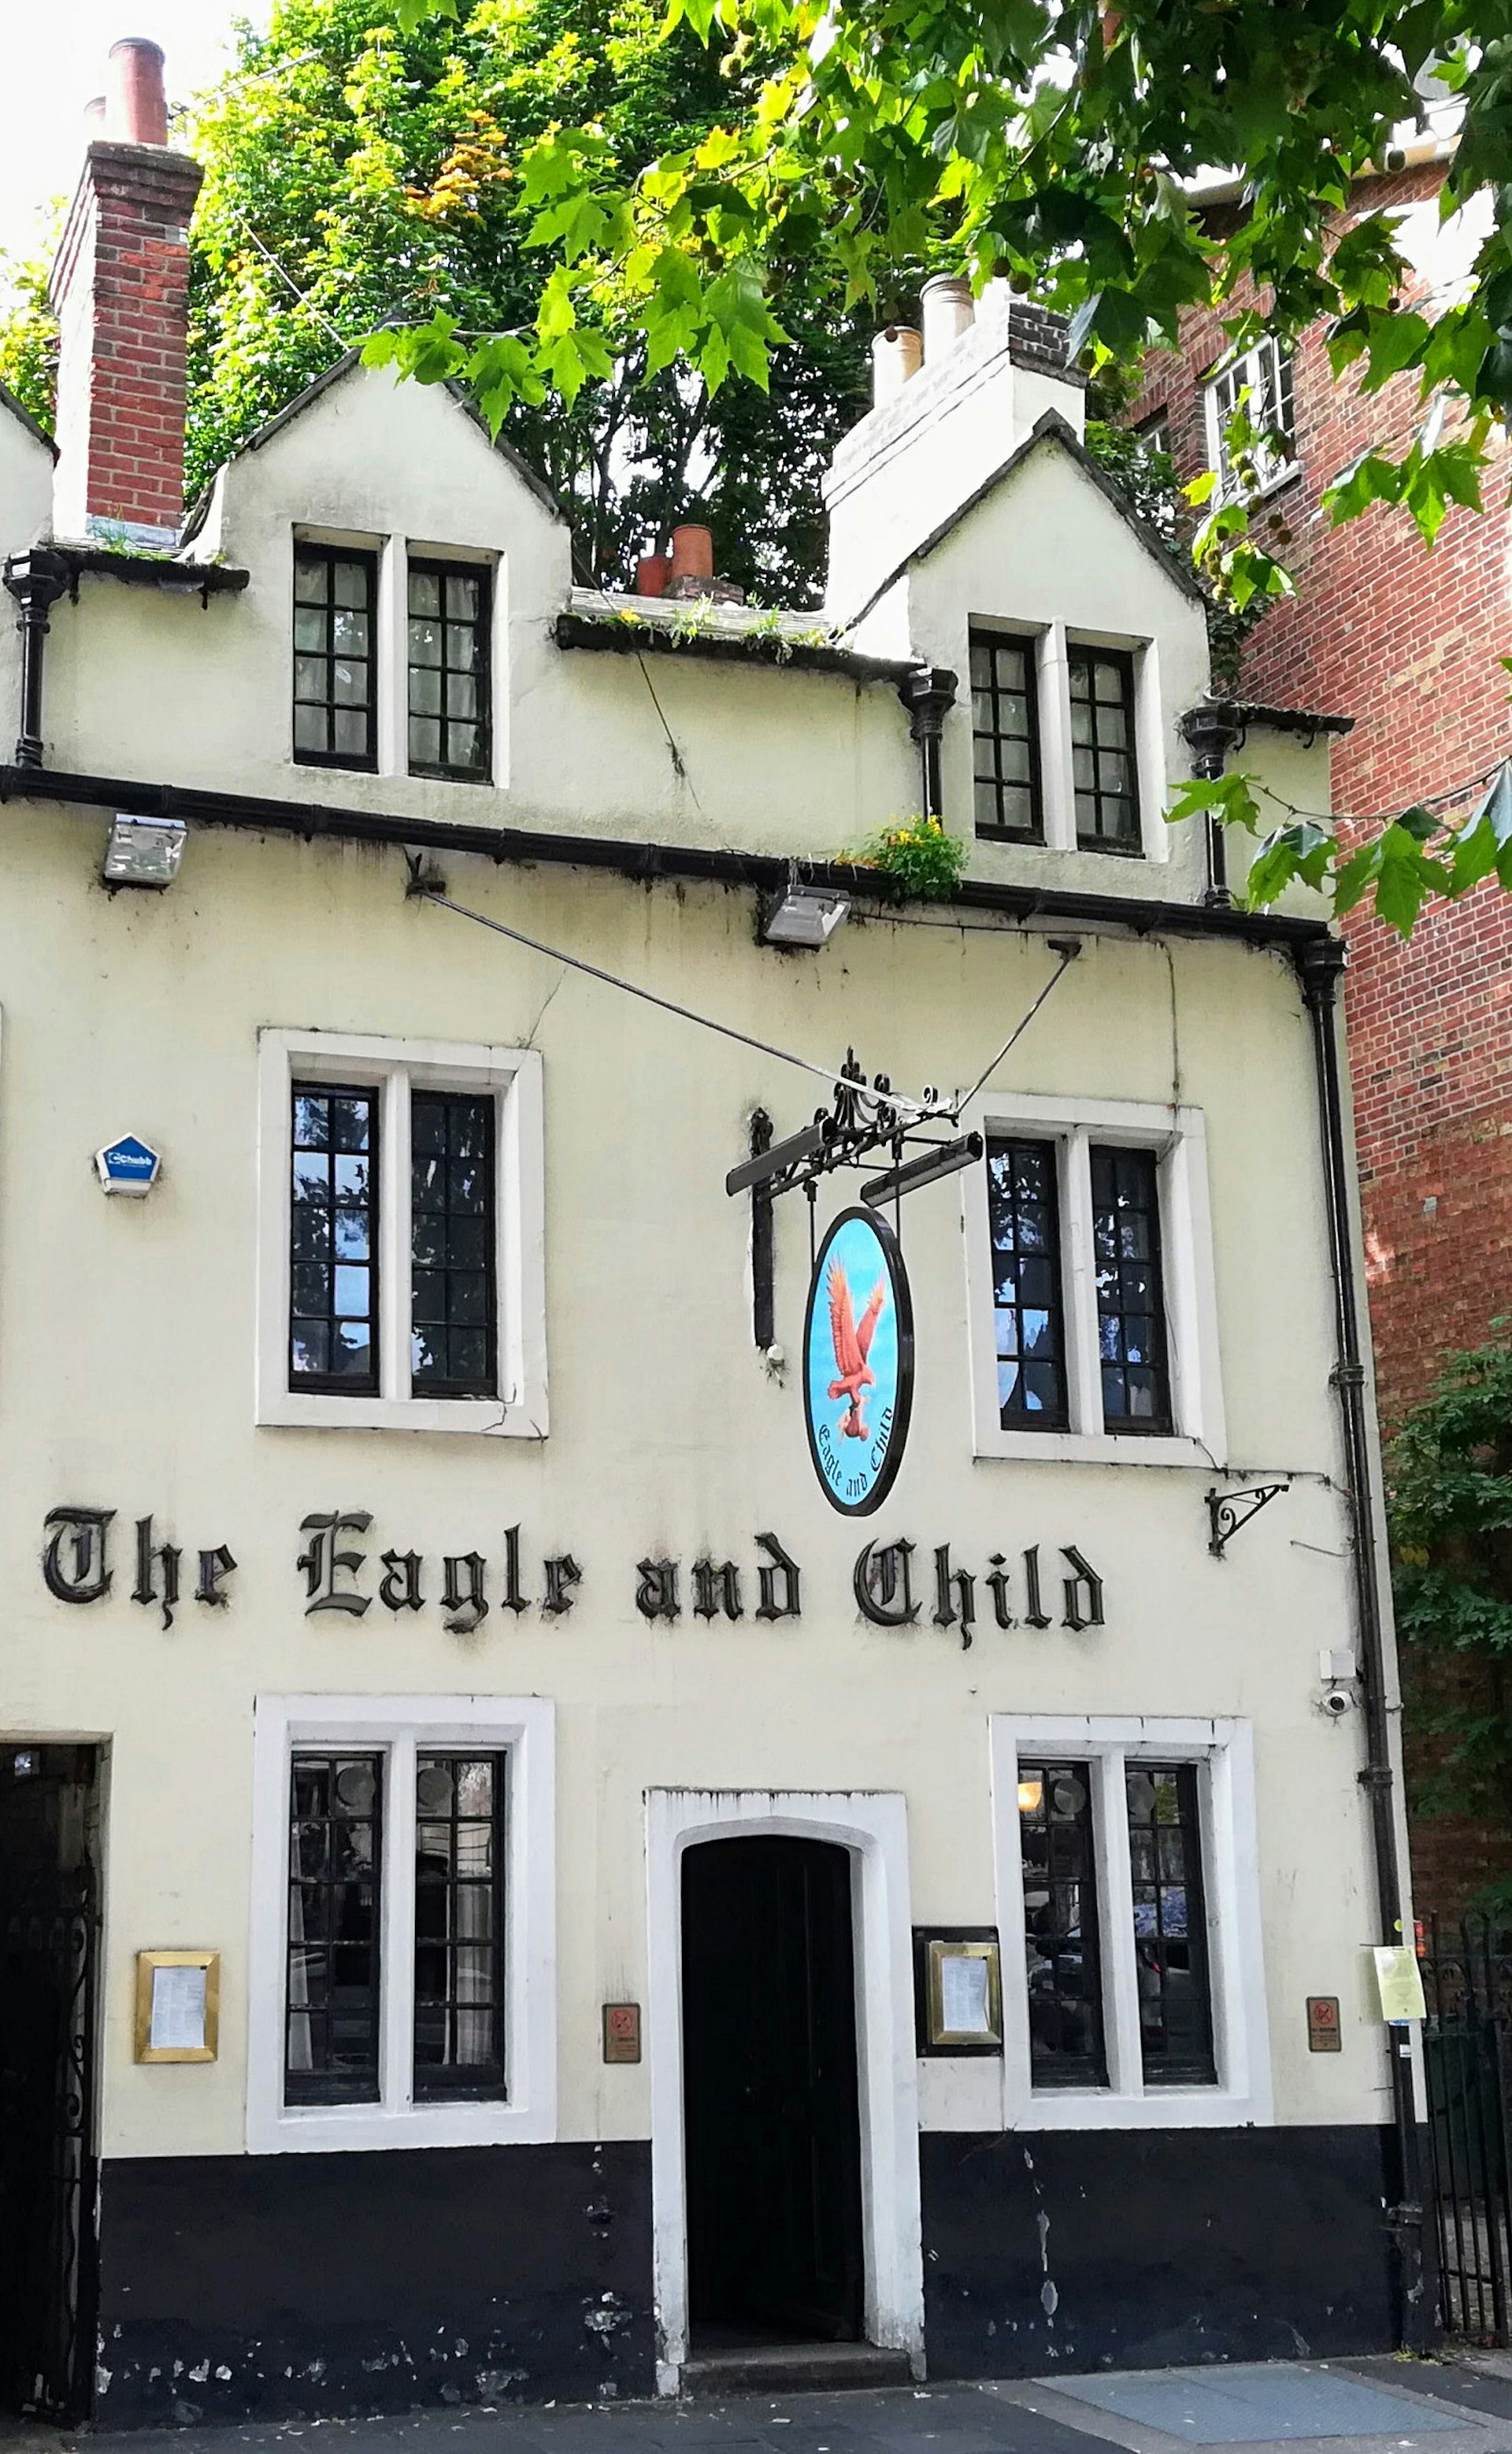 The Eagle and Child, Oxford © Amy Pay / Loney Planet